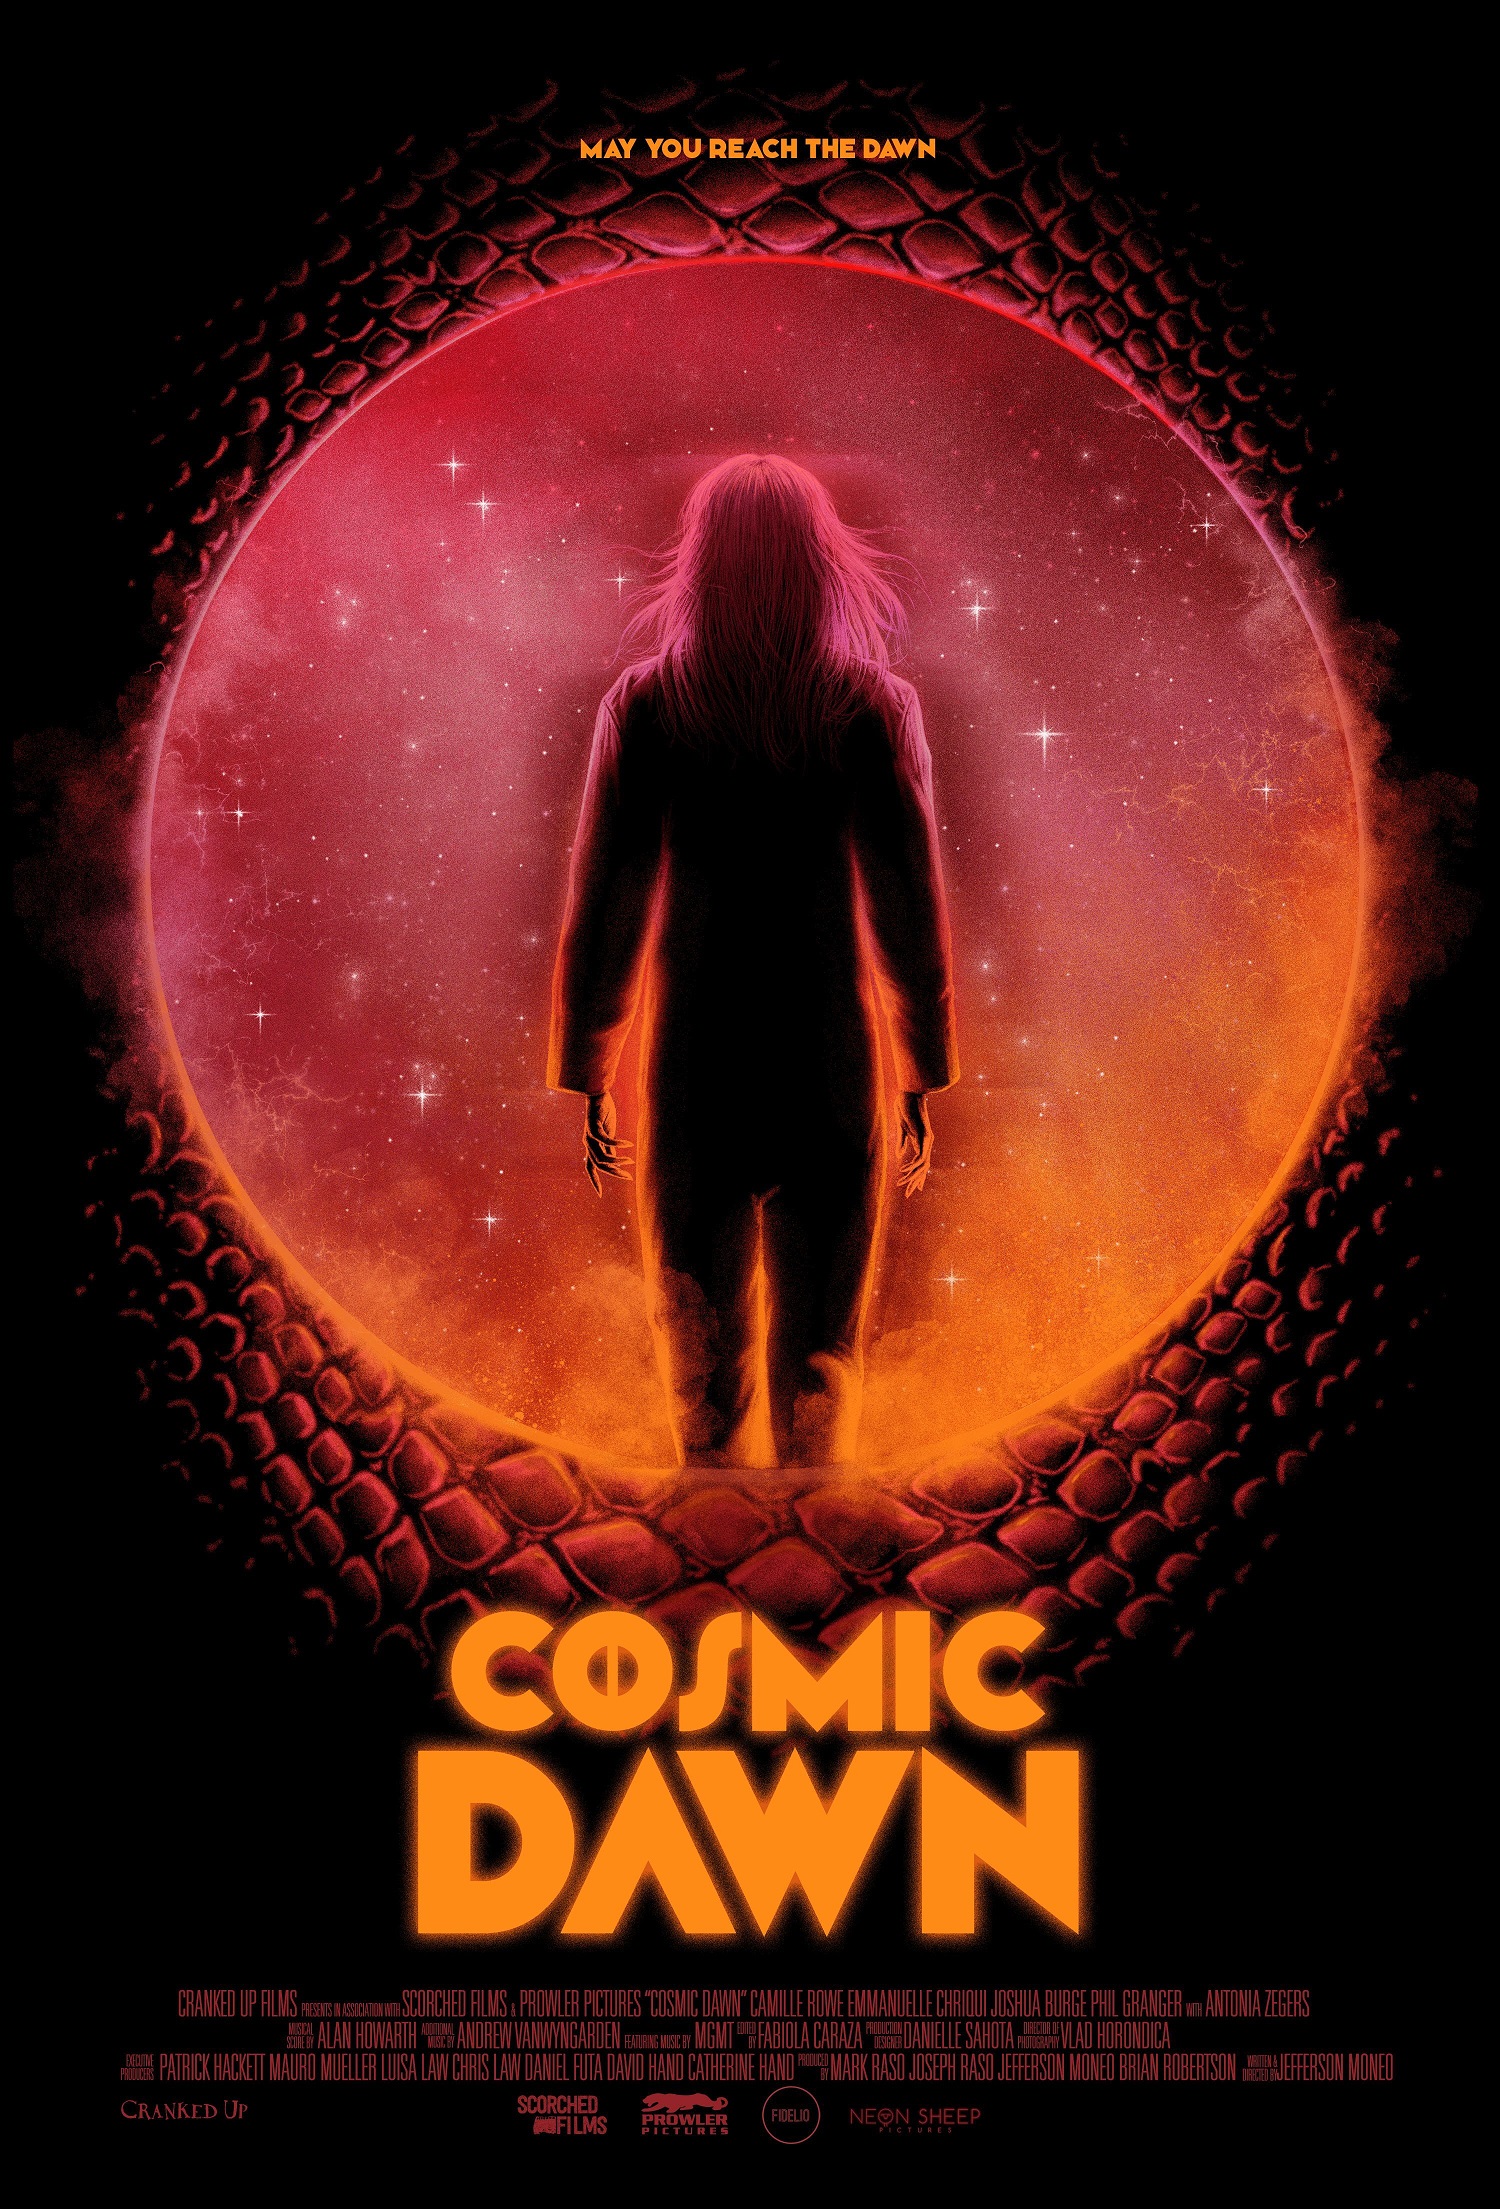 Cosmic Dawn – Movie Review